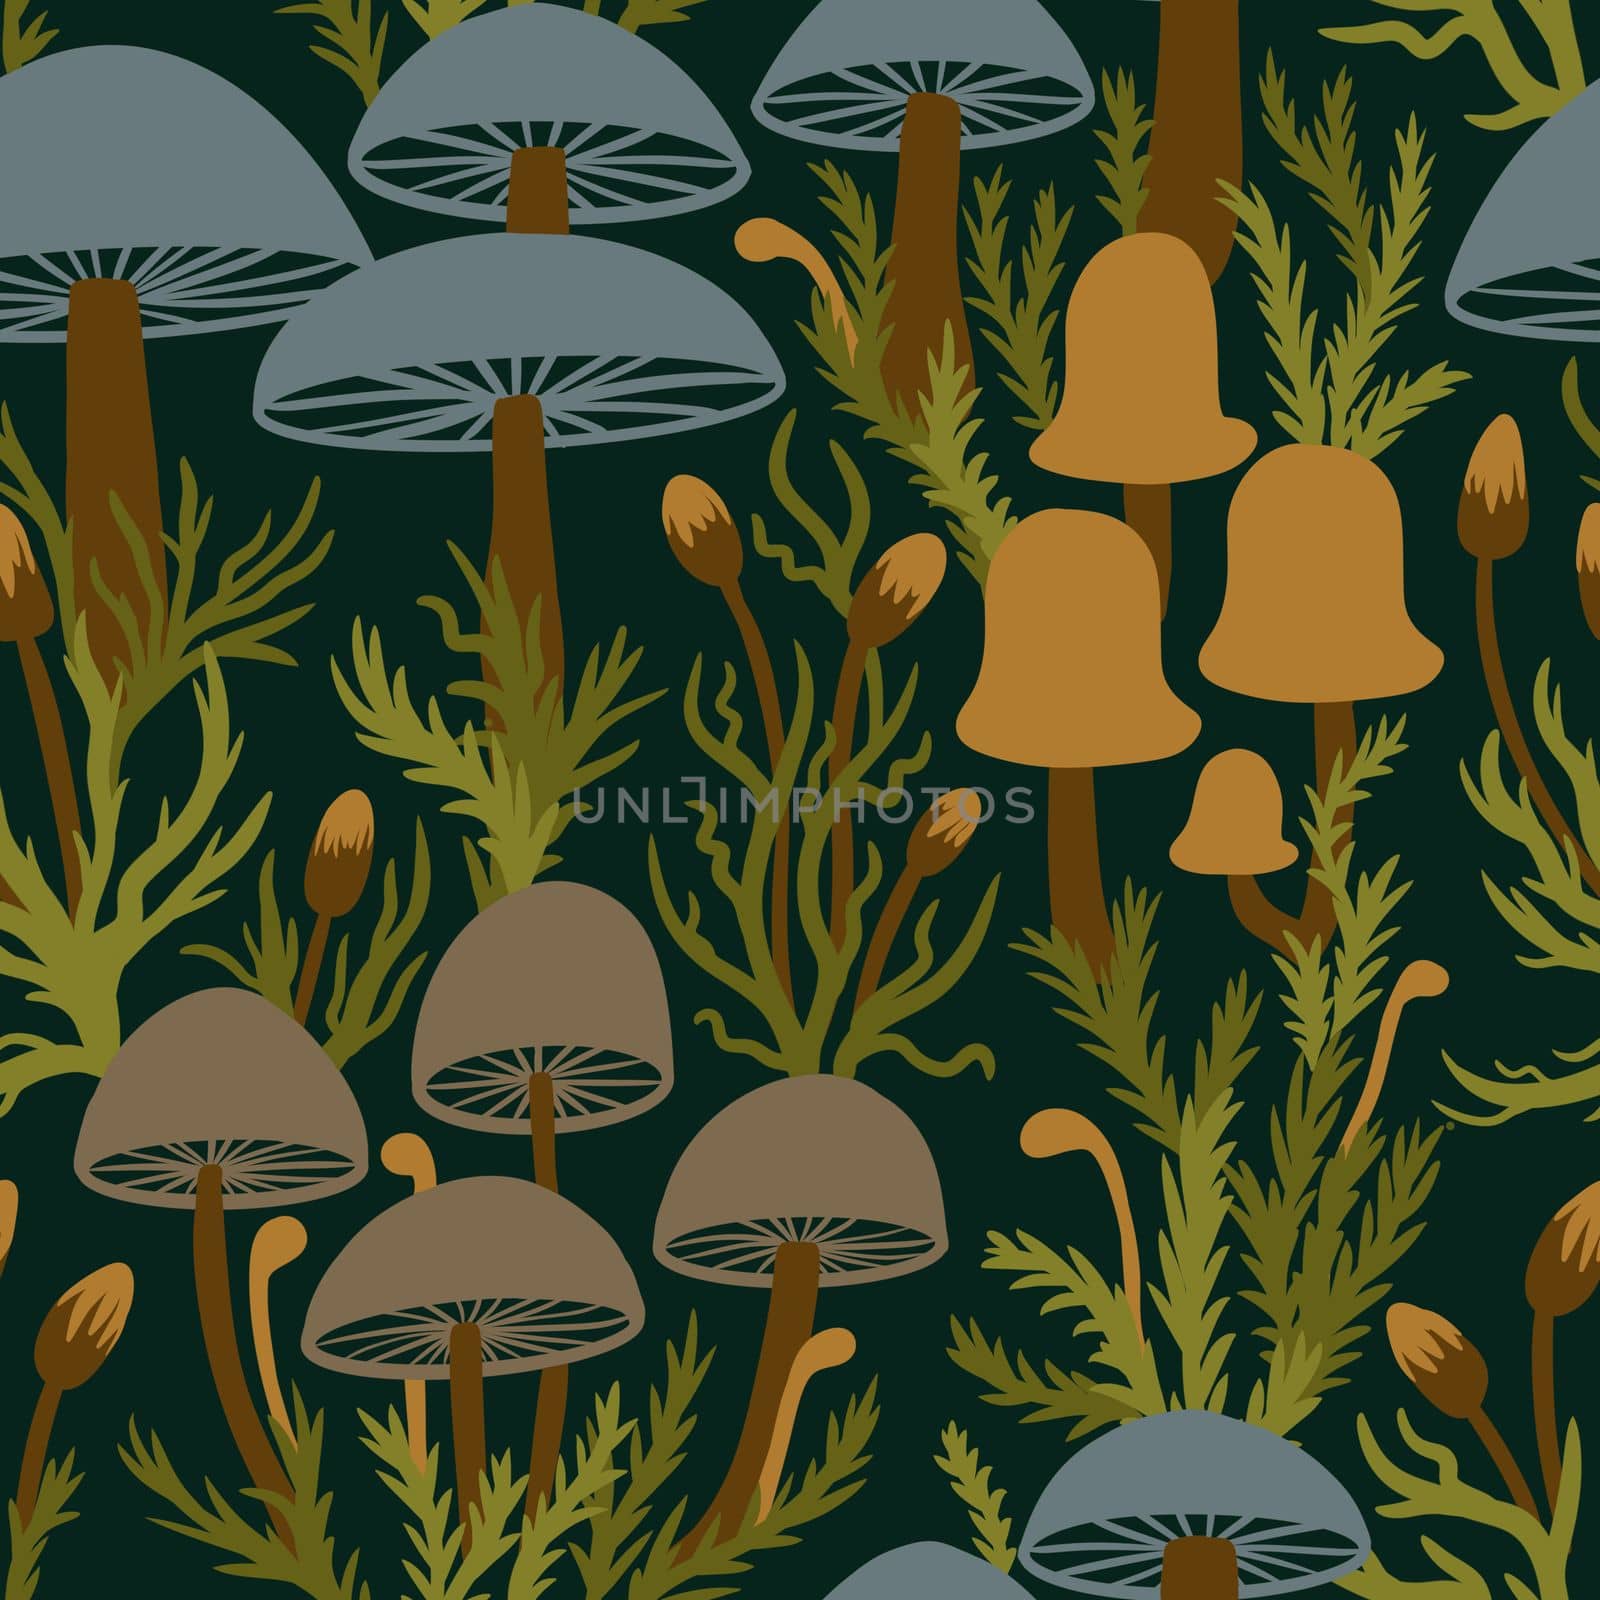 Hand drawn seamless pattern with forest mushroom fungi in grey blue brown on dark green moss background. Toadstool toxic fungi caps poisonous herbs wood woodland, witch concept, fall autumn flora design